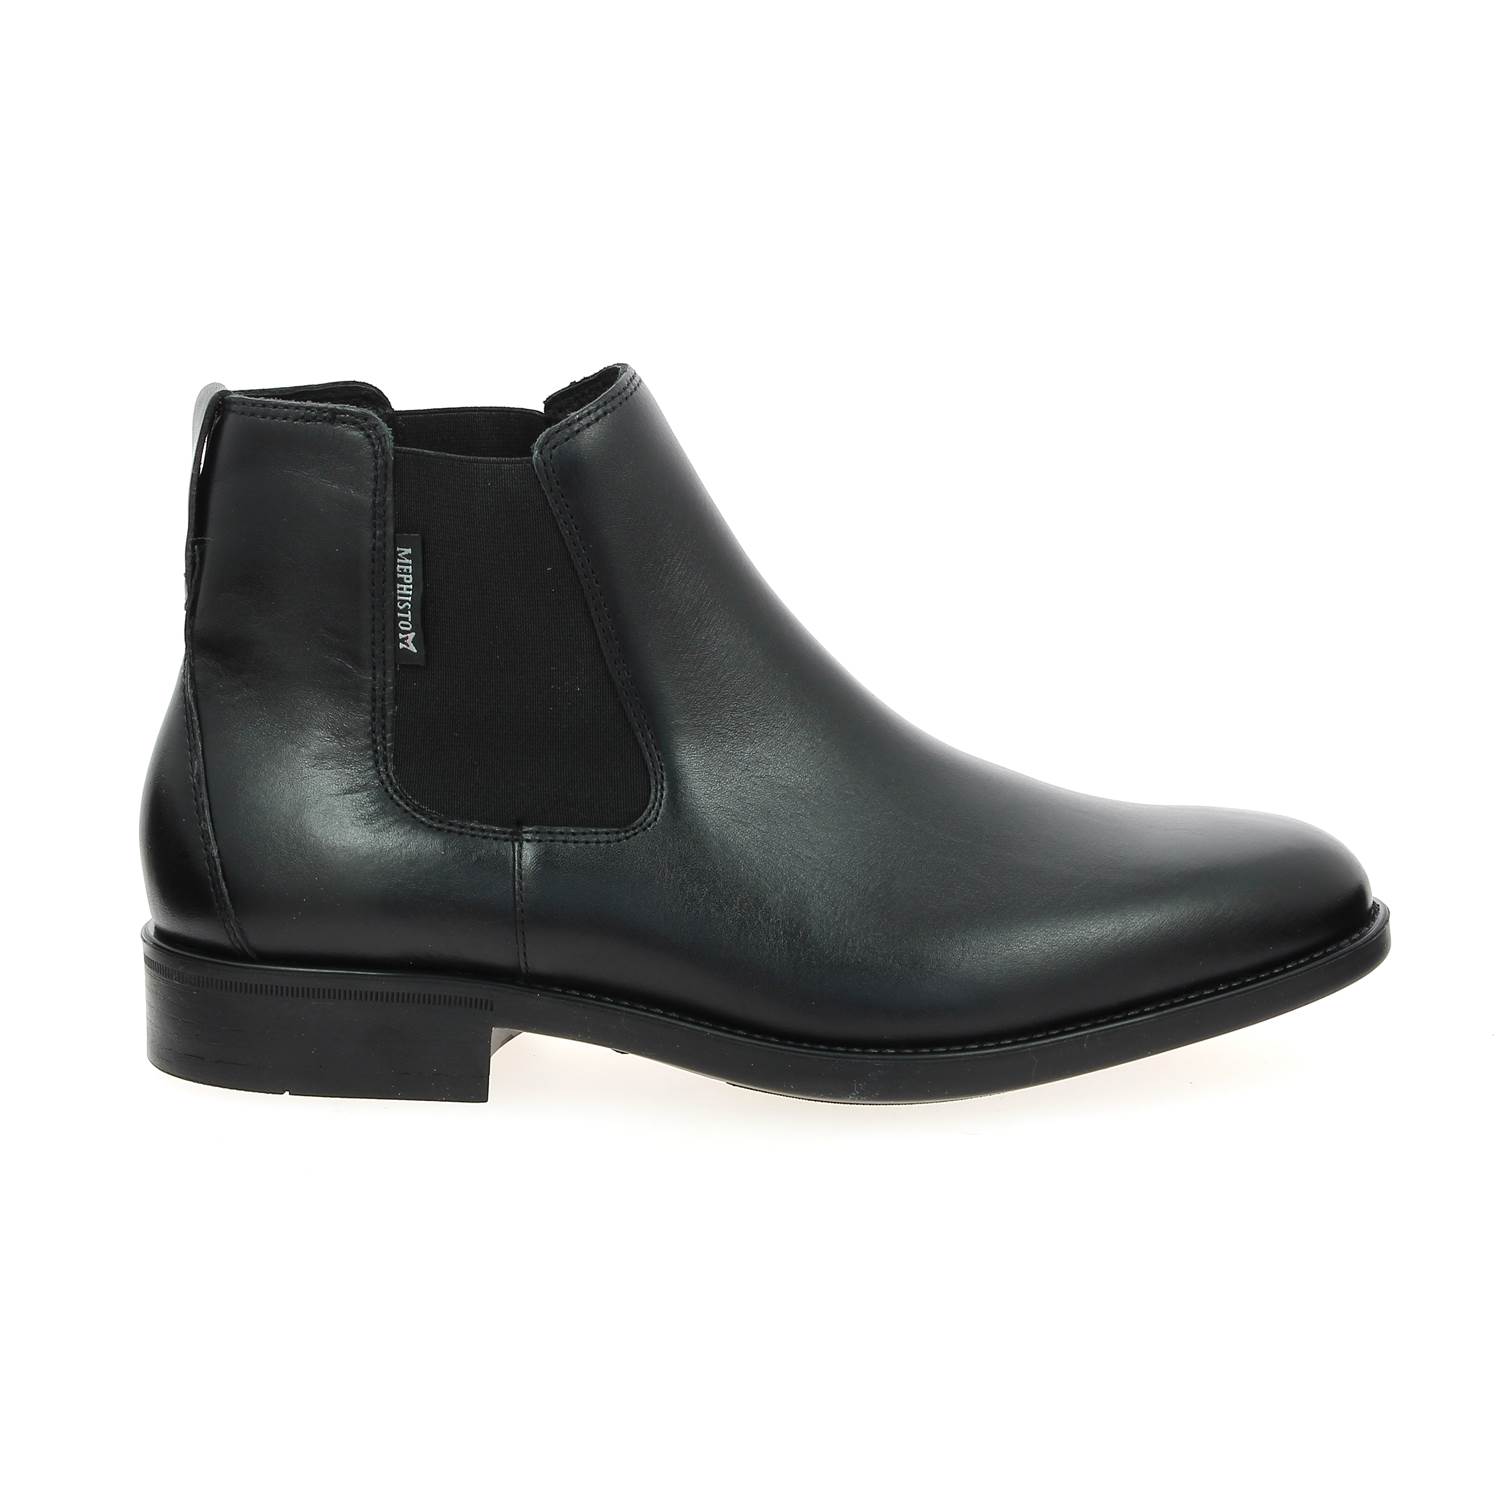 02 - COLBY - MEPHISTO - Boots et bottines - Cuir